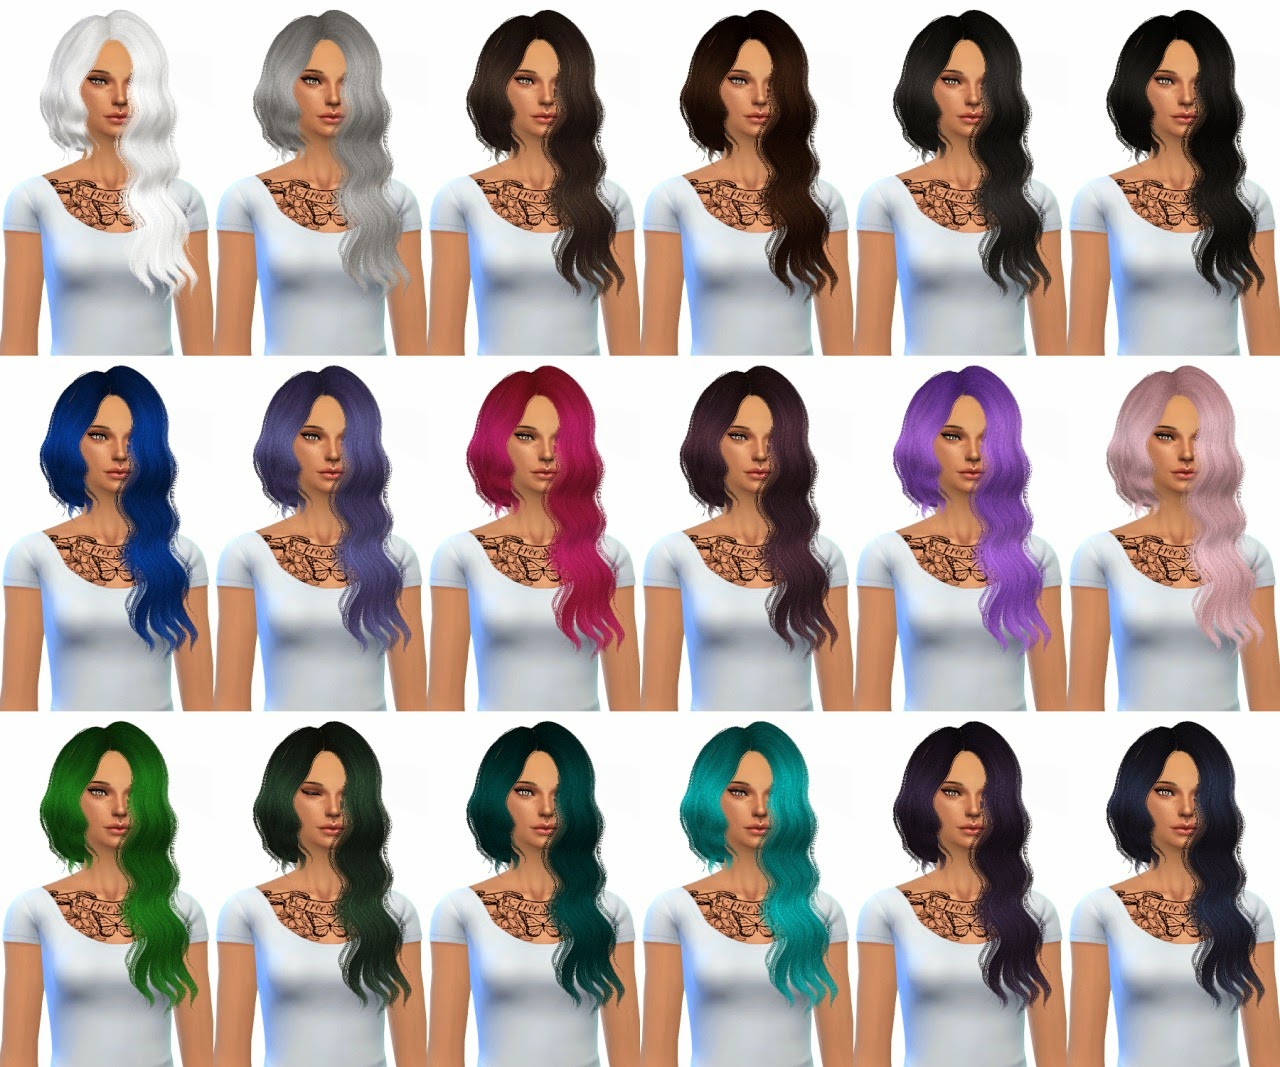 My Sims 4 Blog Hair Retextures By Missparaply